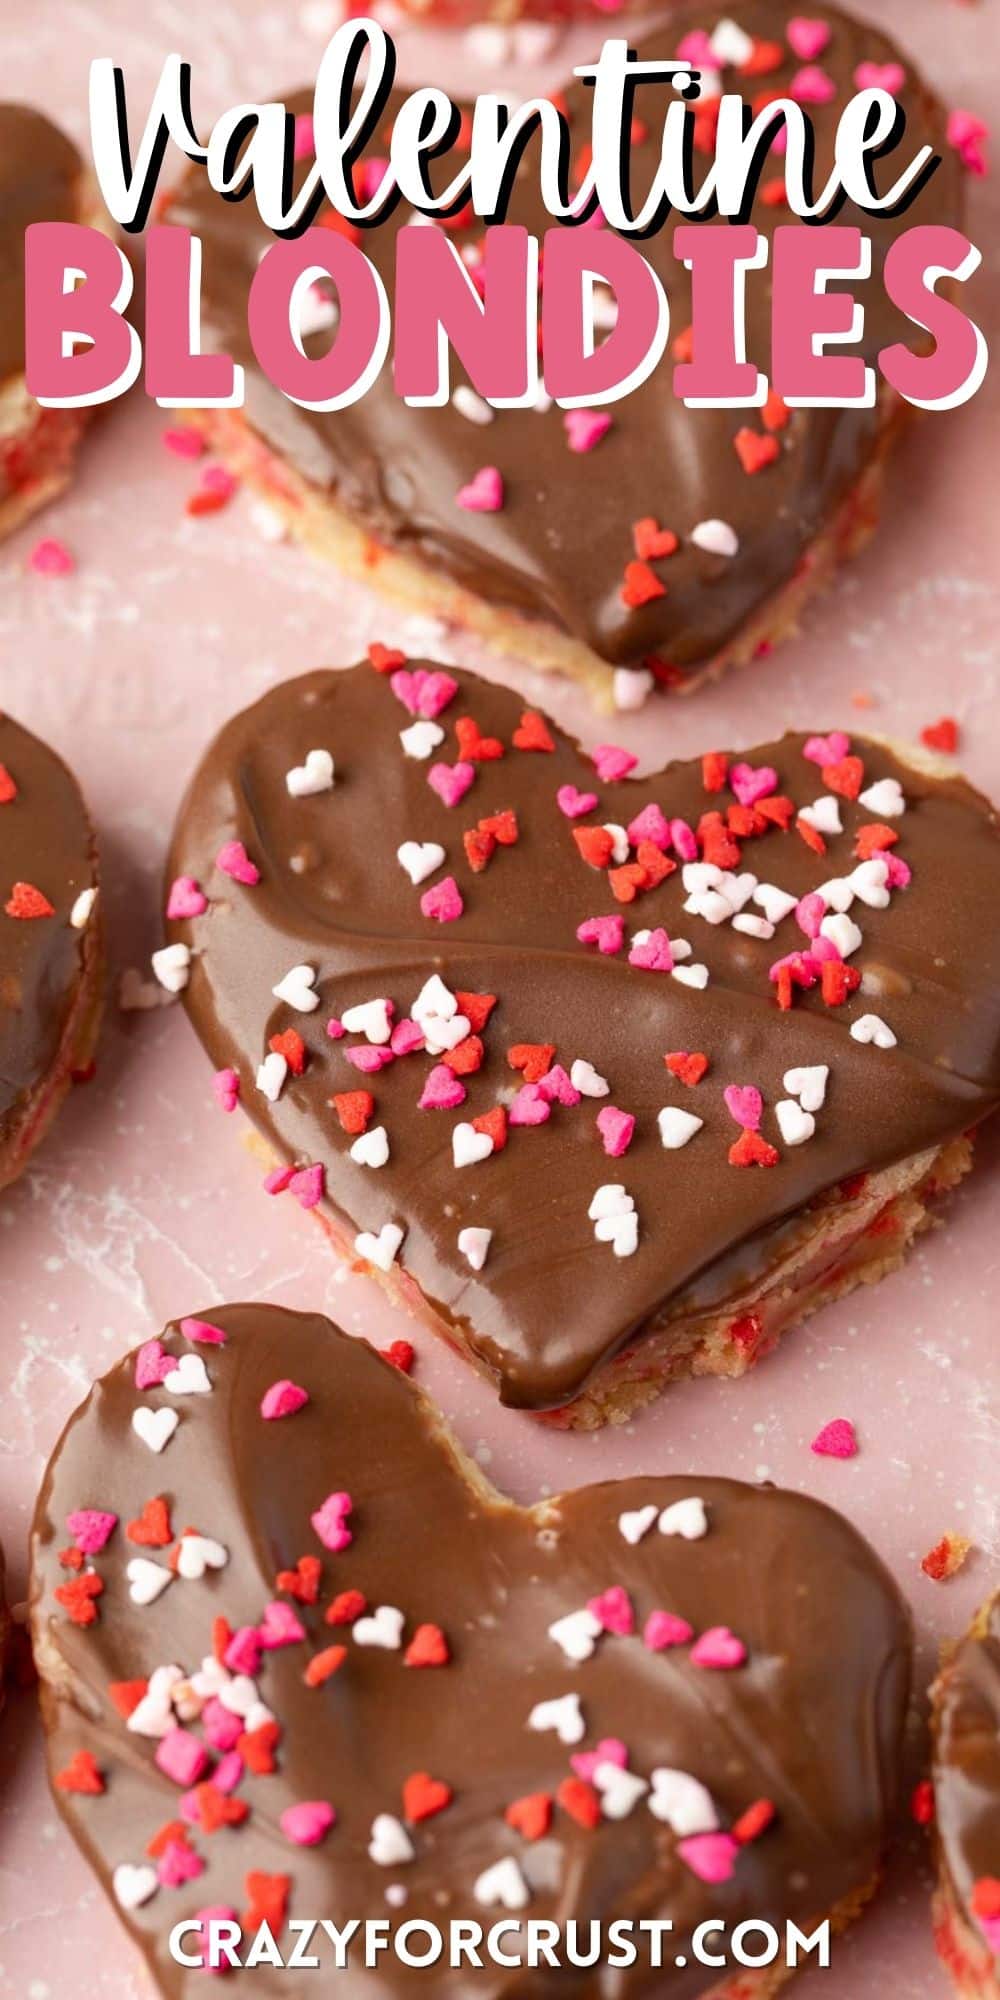 heart shaped sugar cookies with chocolate frosting and red sprinkles on top with words on the image